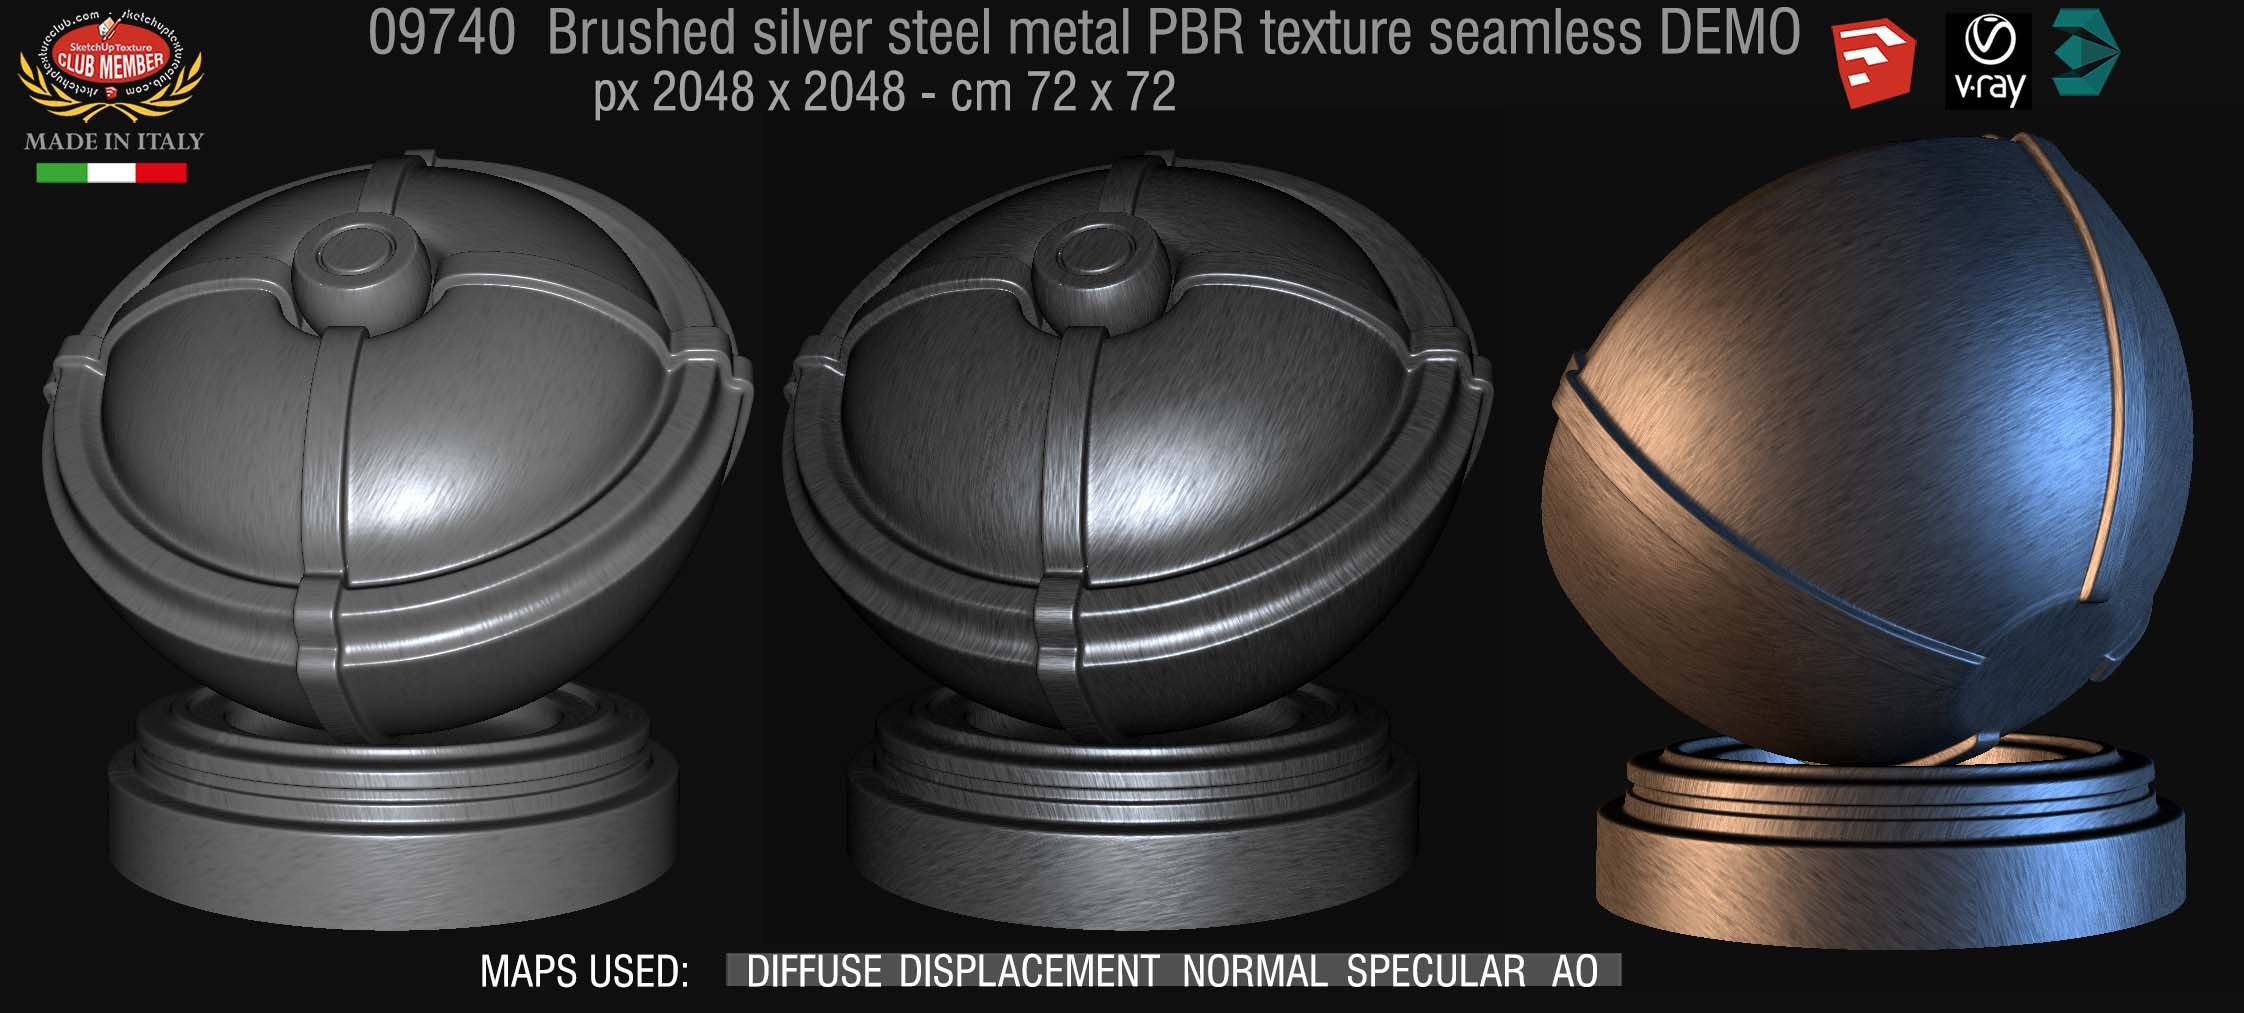 09740 Brushed silver steel metal PBR texture seamless DEMO